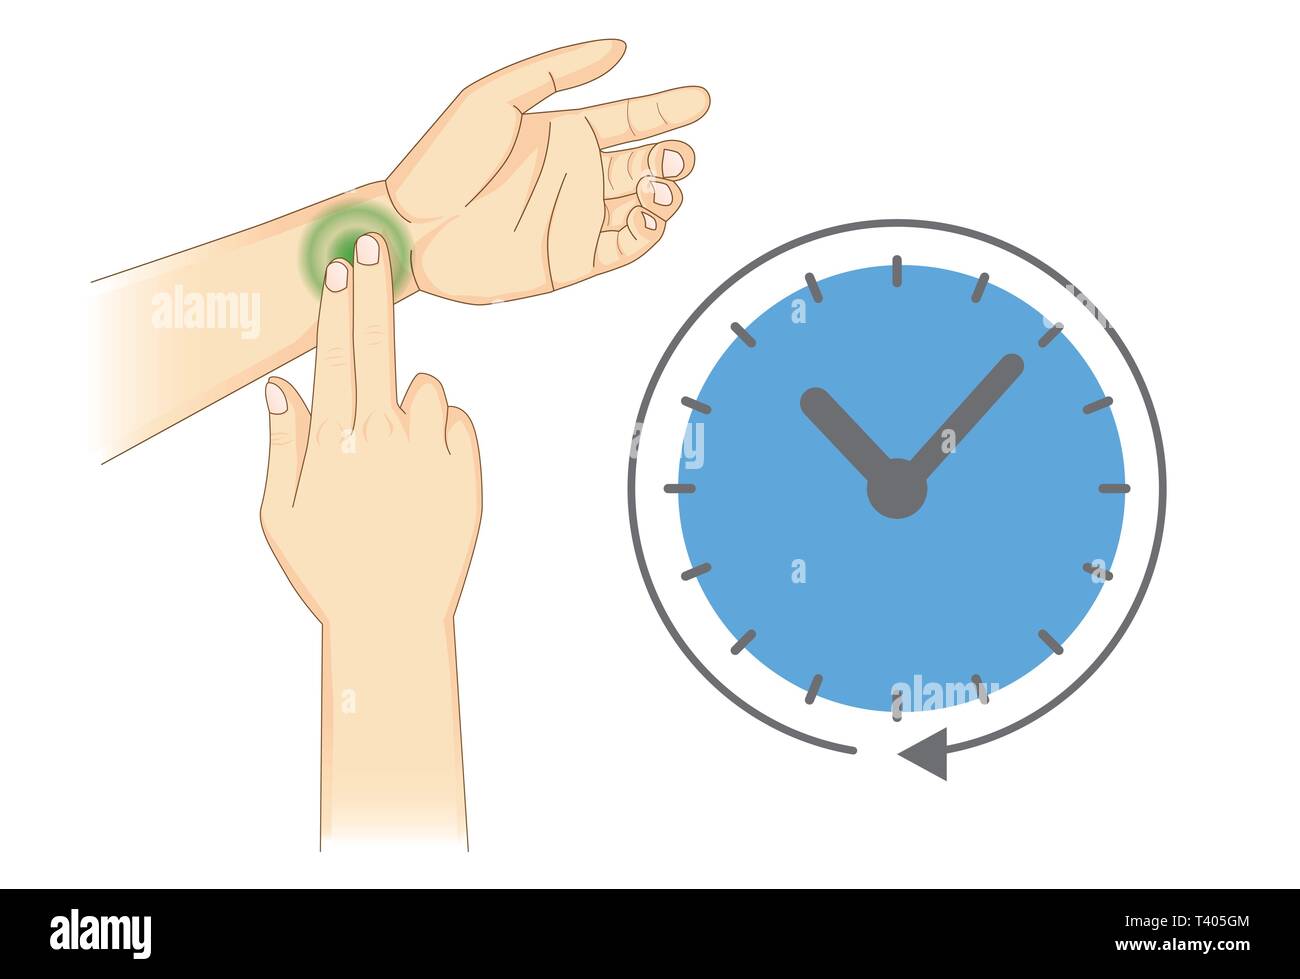 Doing use two fingers to check radial Pulse with time icon. Stock Vector